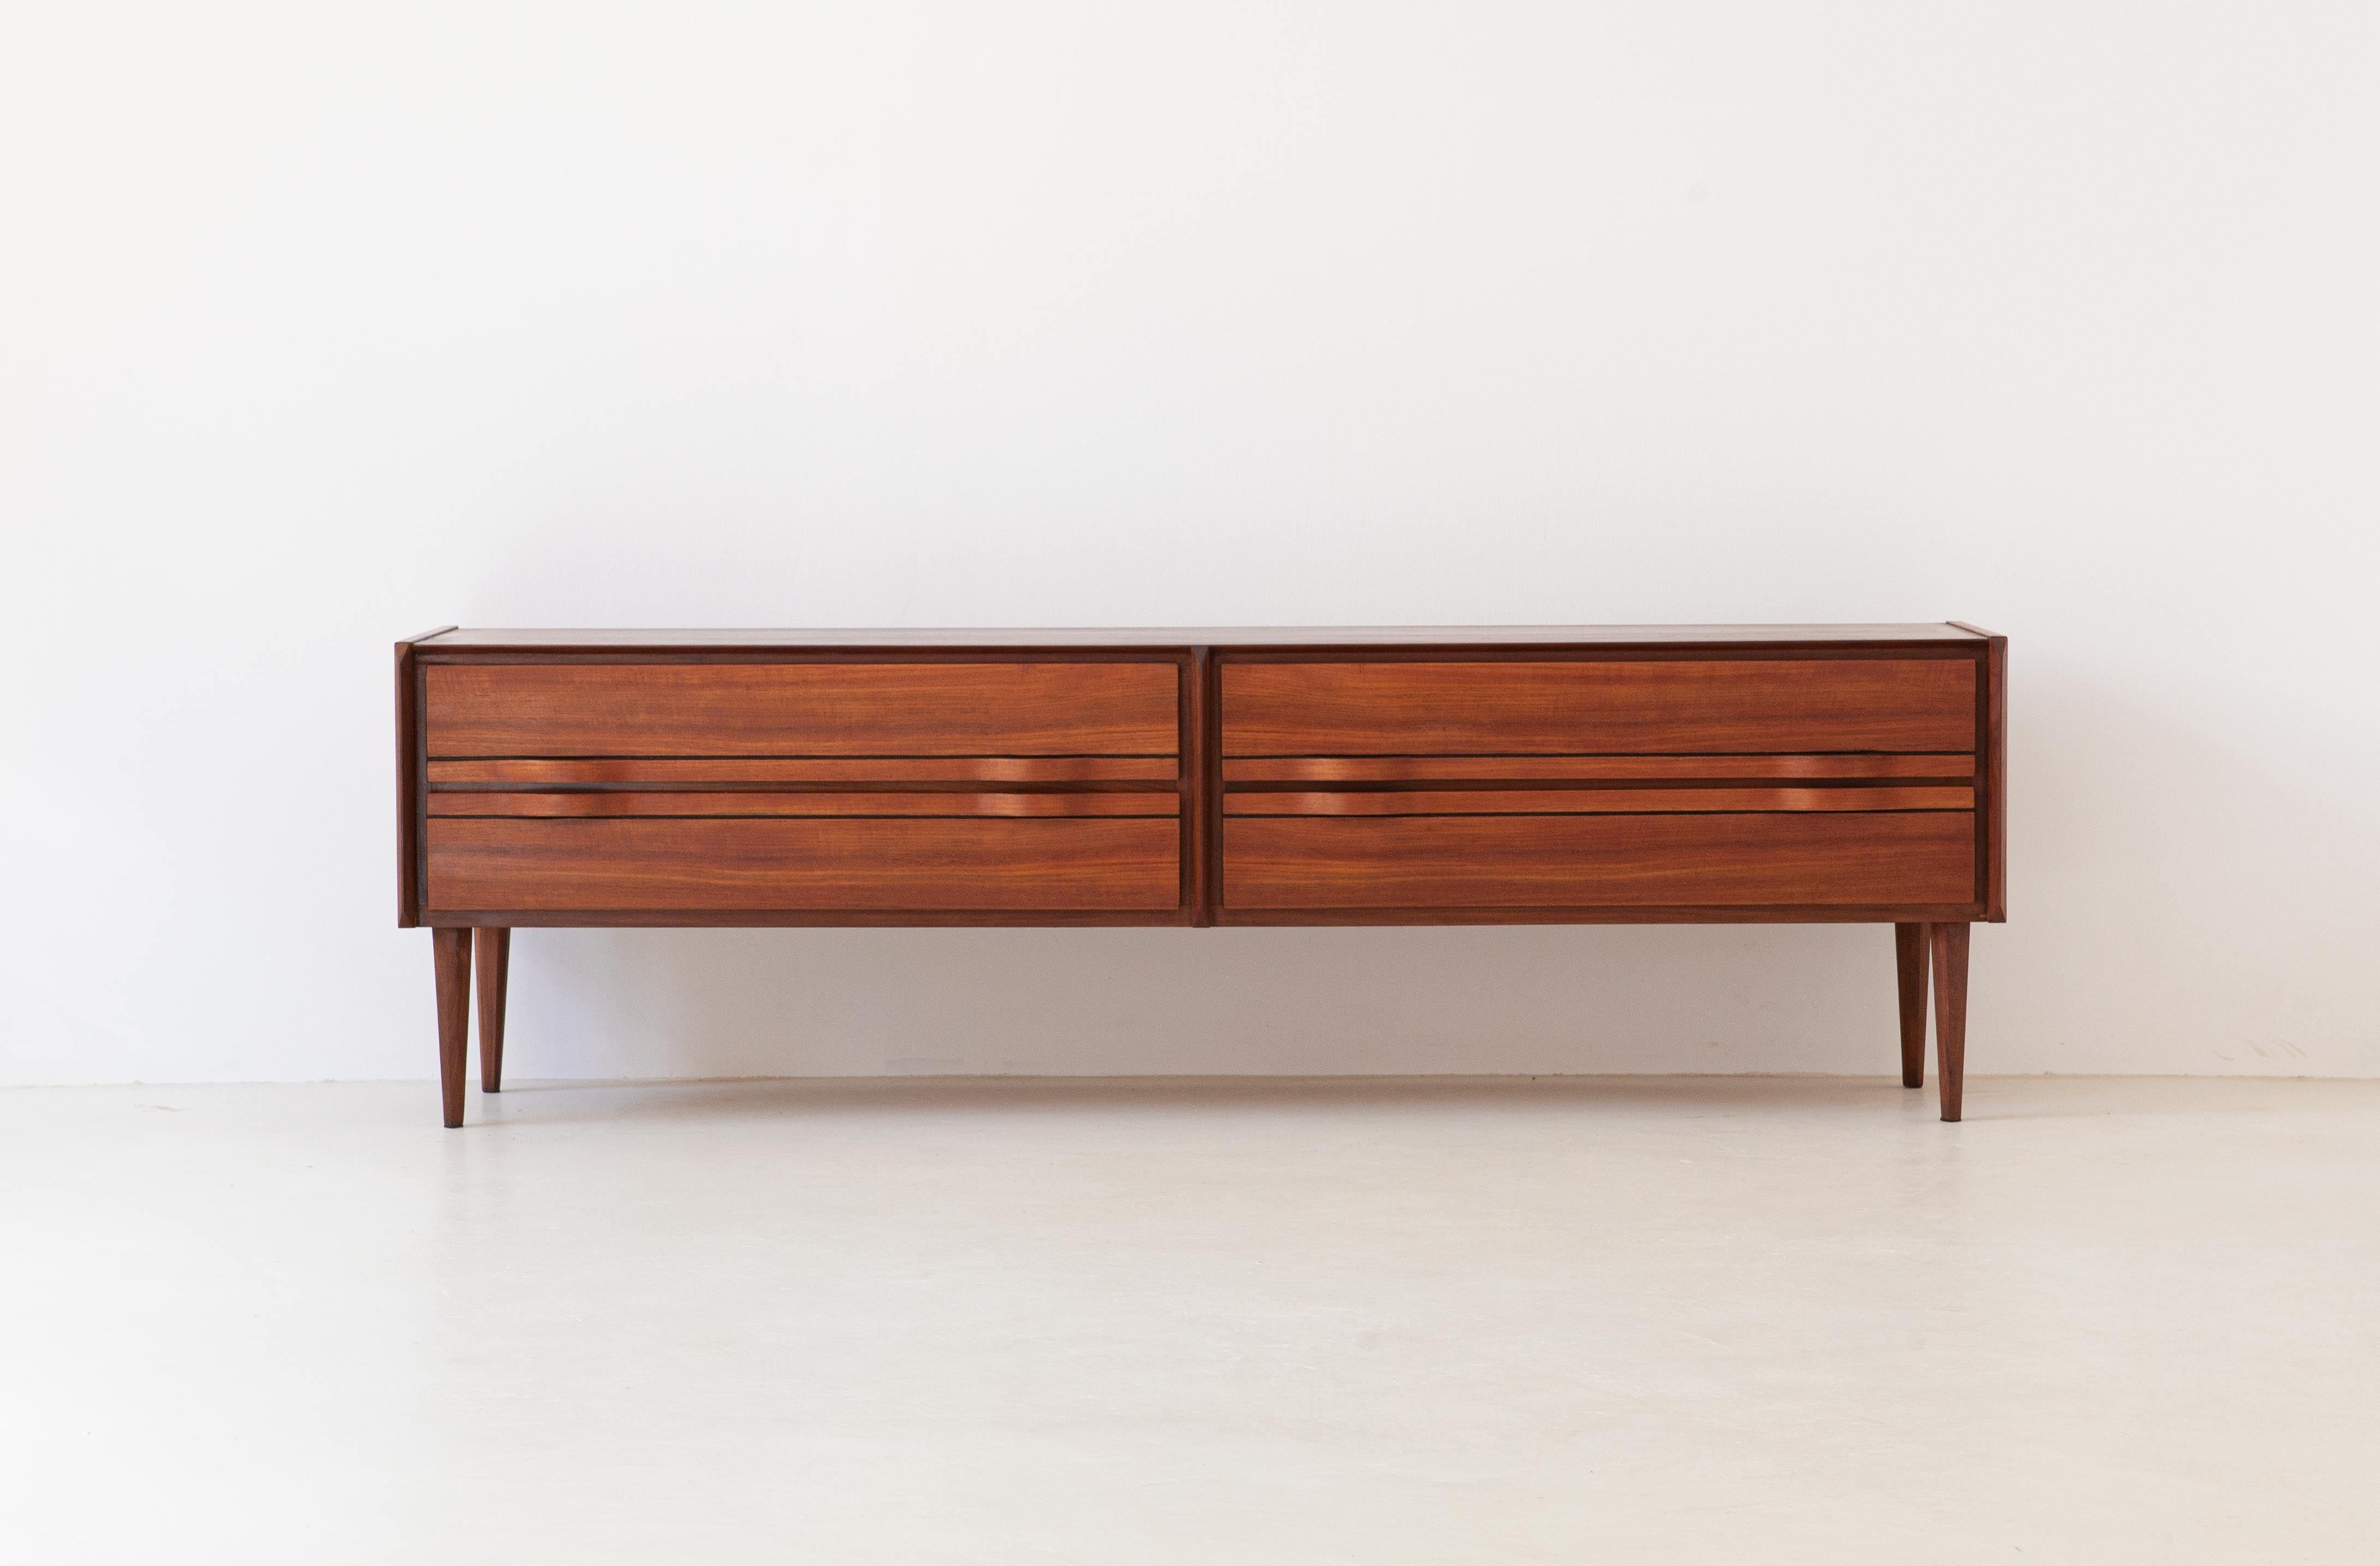 A modern sideboard with chest of drawers manufactured in Italy during the 1950s

This credenza has 4 drawers with handles made from teak bentwood
We have made a full restoration on this piece:
The original finish has been completely removed to